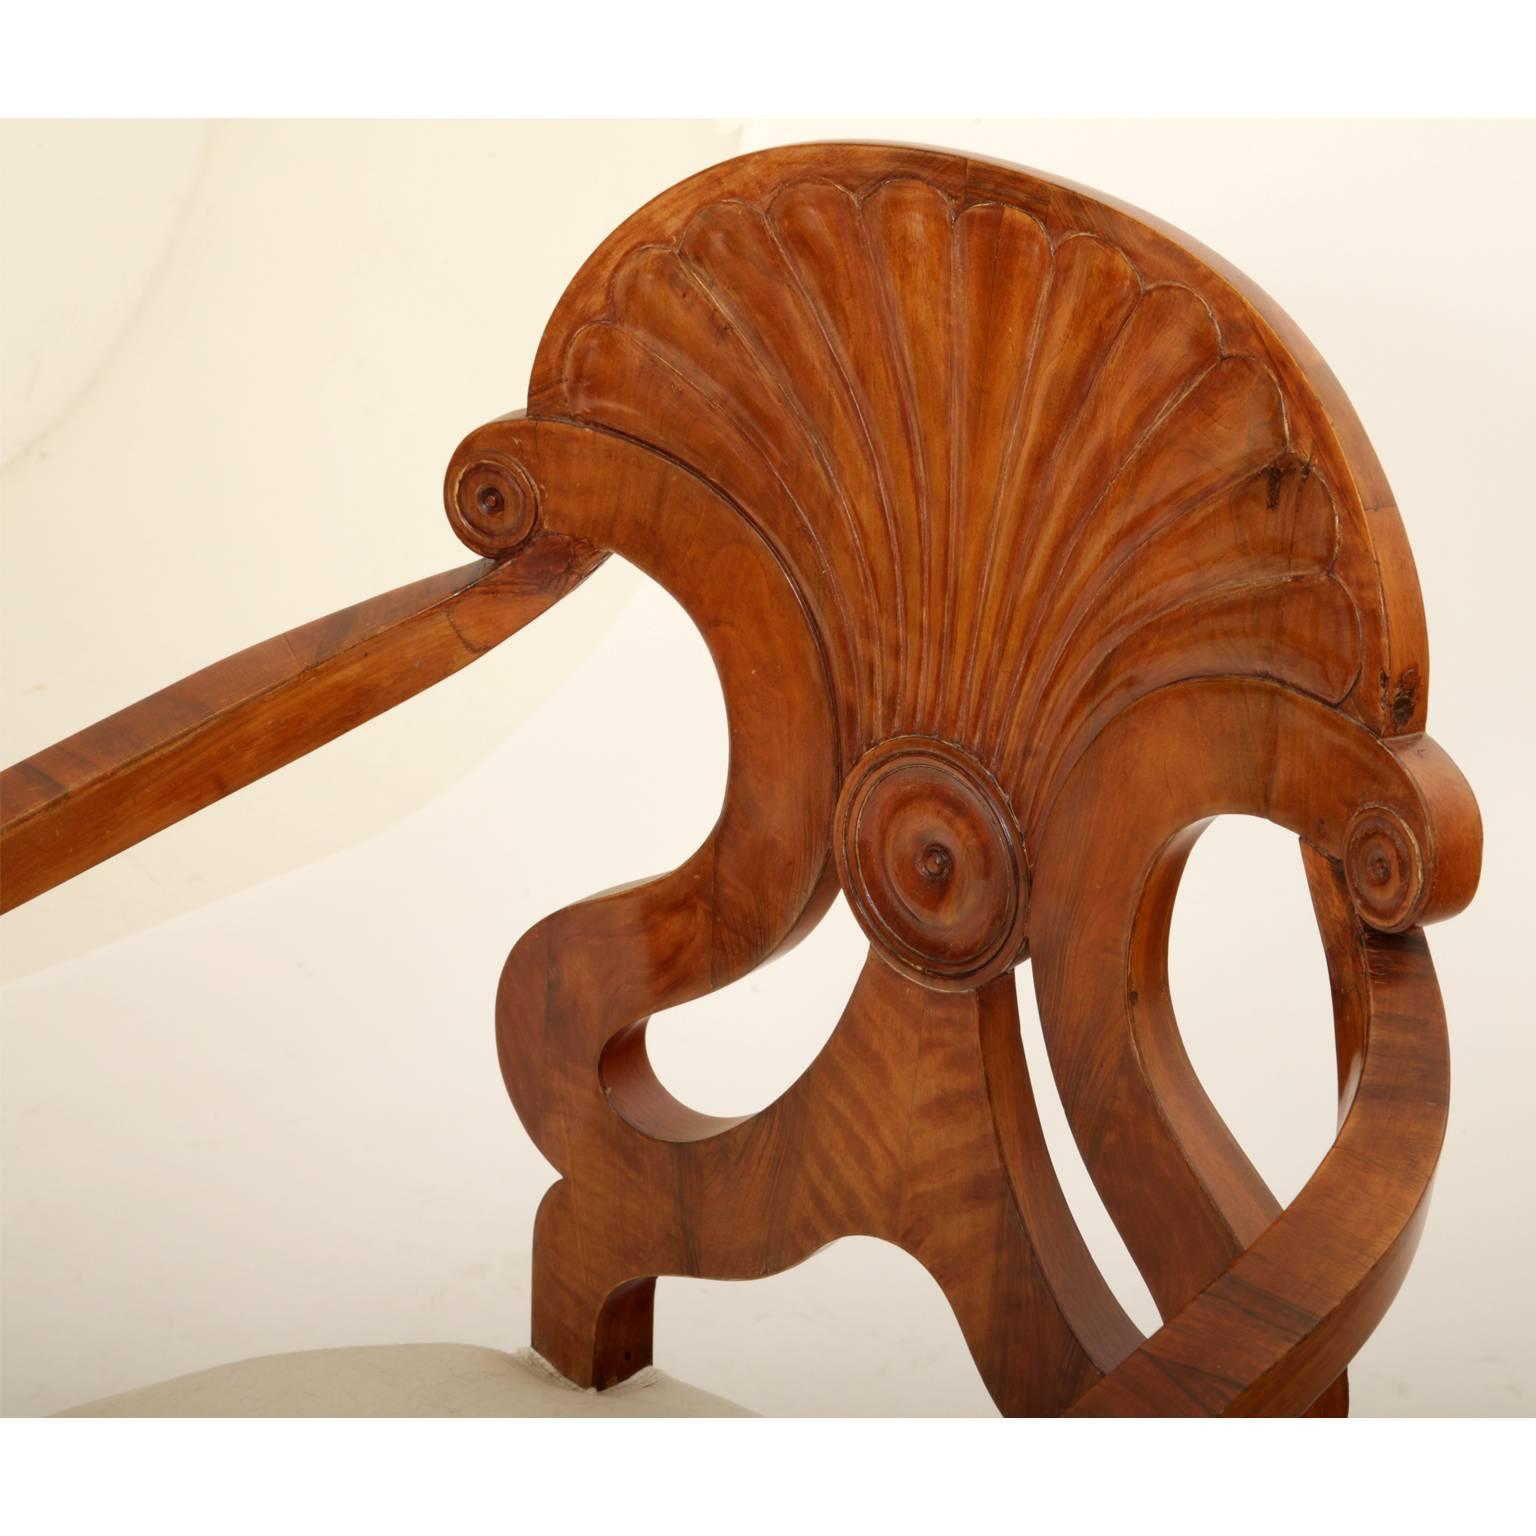 Pair of Biedermeier bergère chairs with a fan-shaped carved backrest and tapered feet.